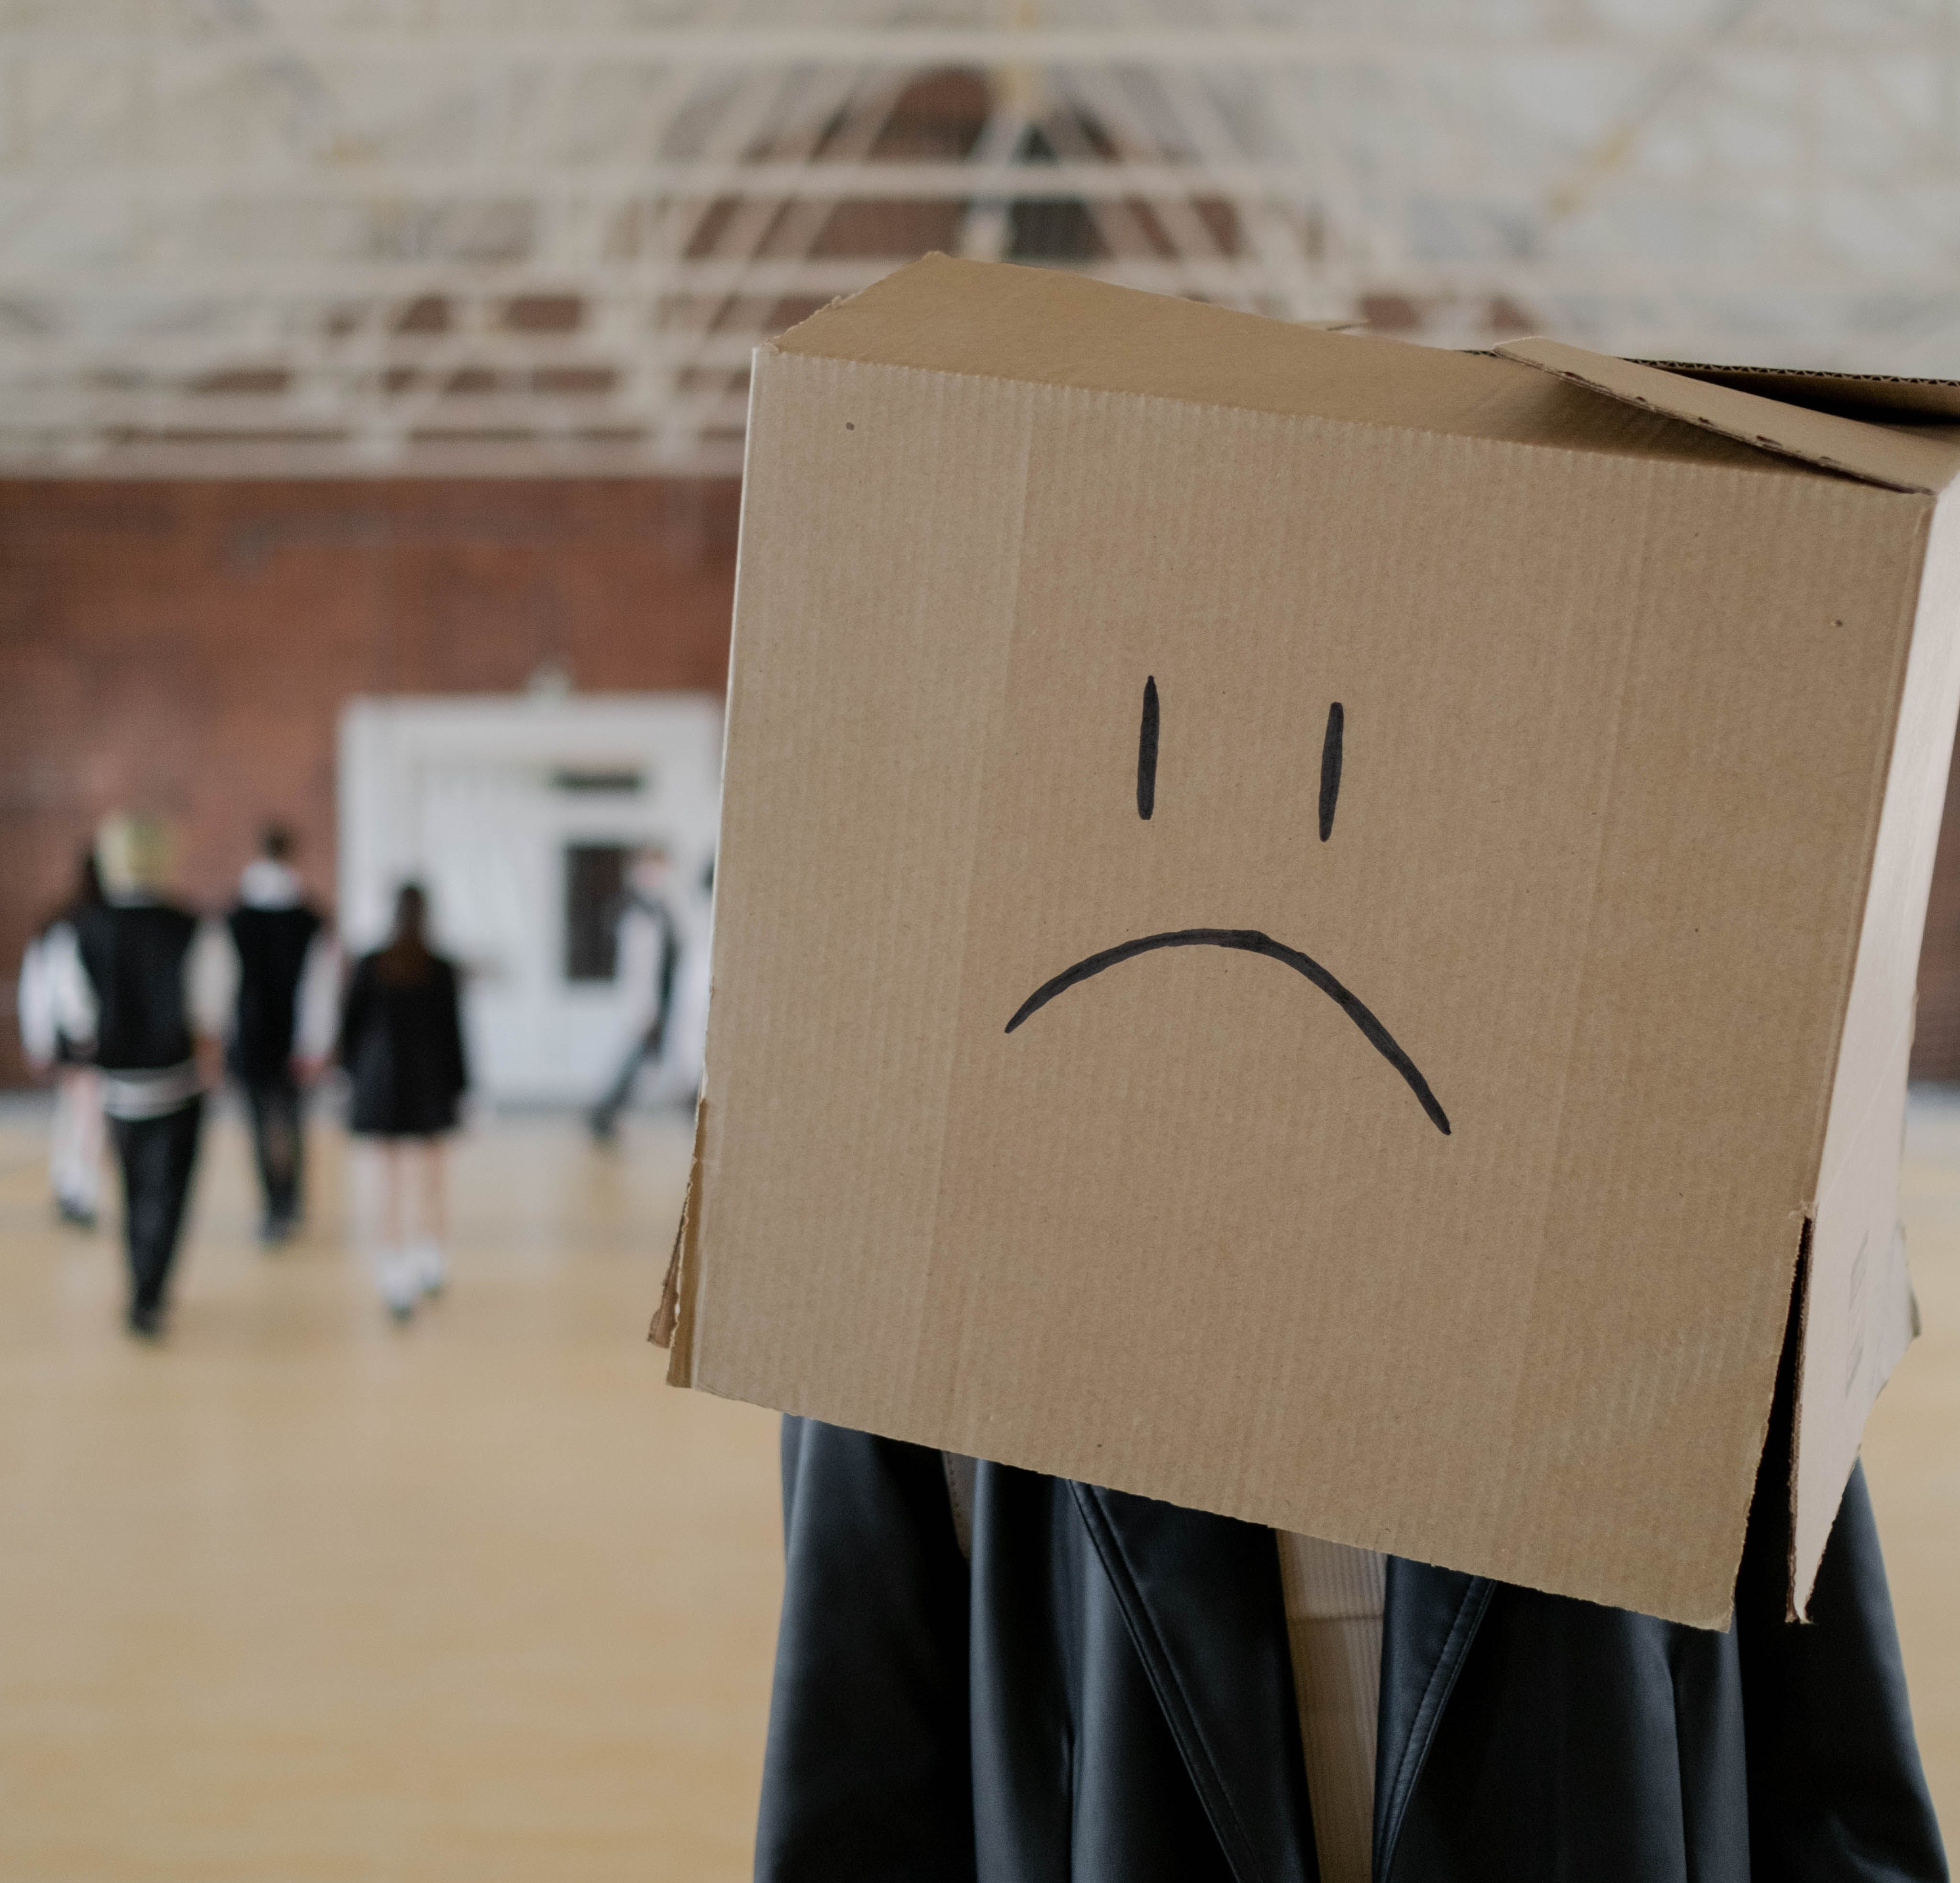 Person with a box over the head with an unhappy face drawn on it